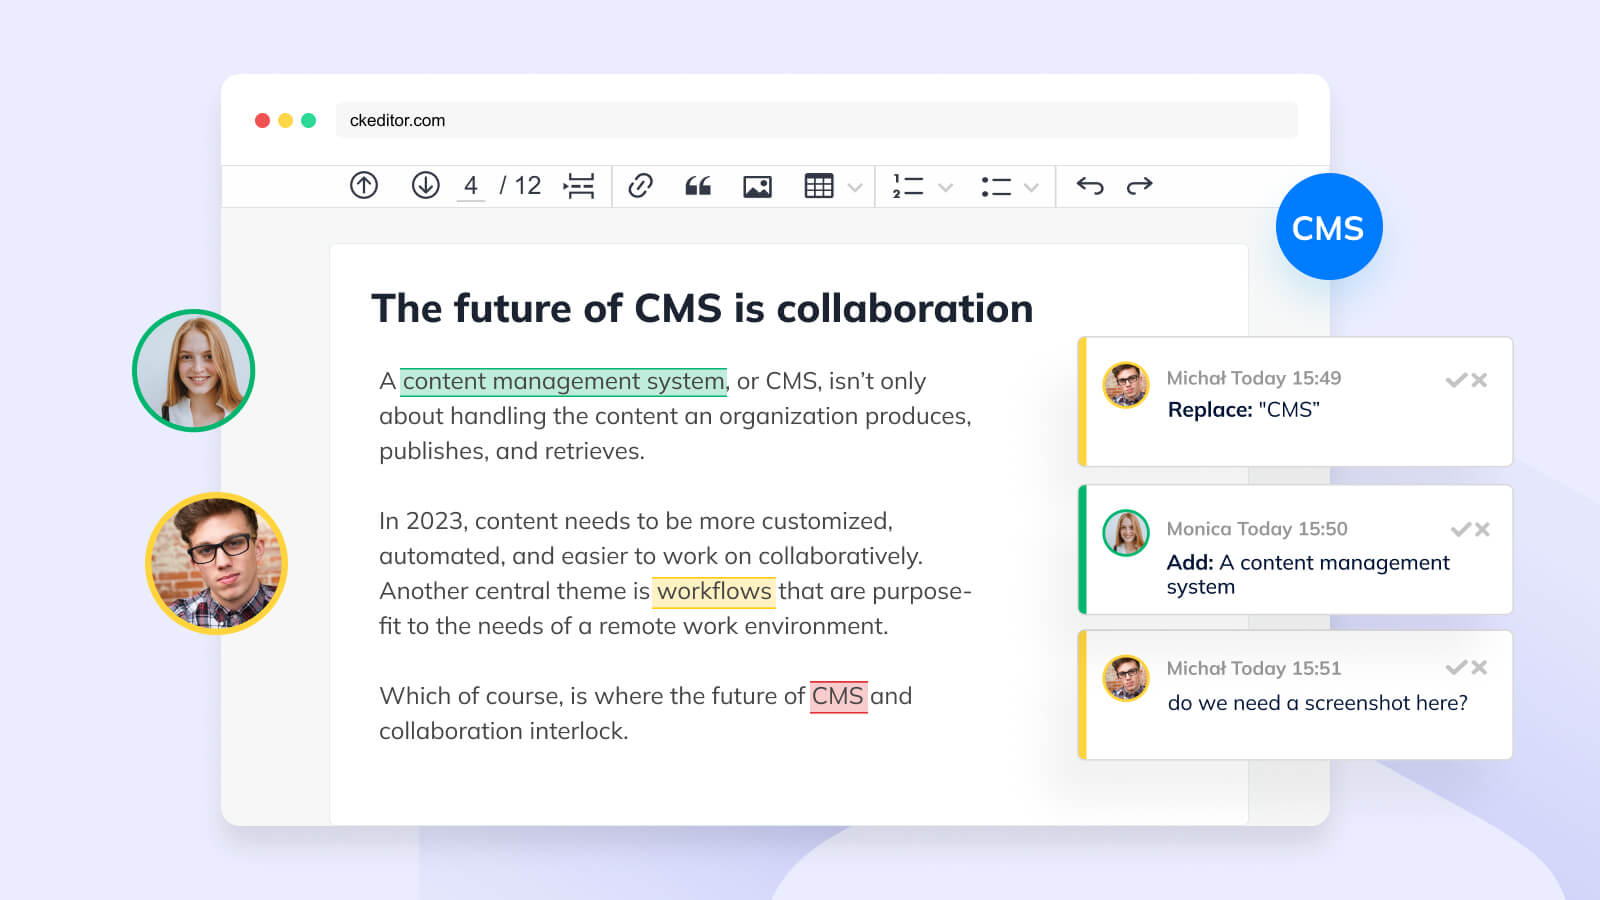 The future of CMS is collaboration | CKEditor